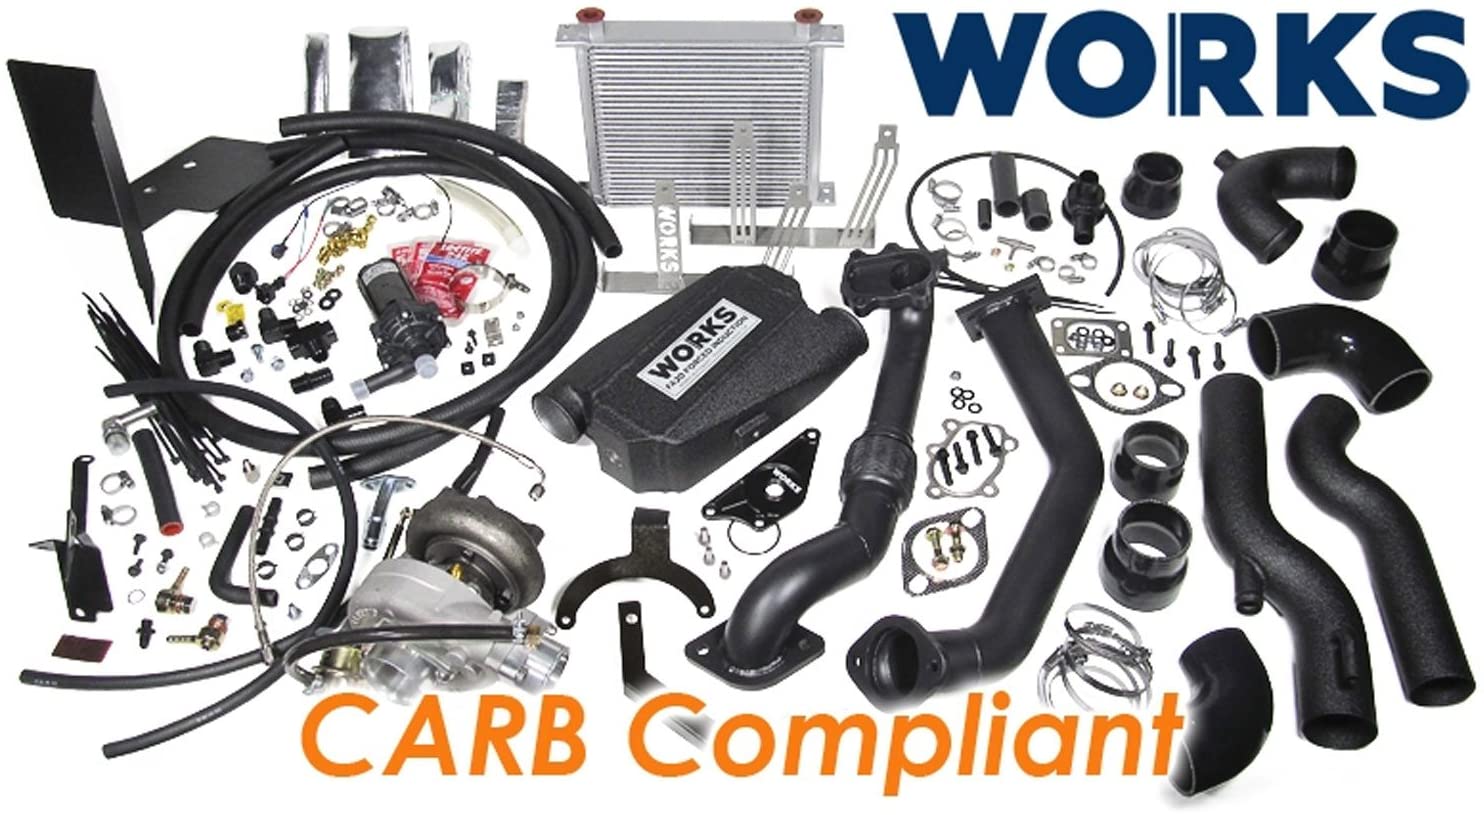 Works Stage 2 Turbo Kit - CARB Compliant